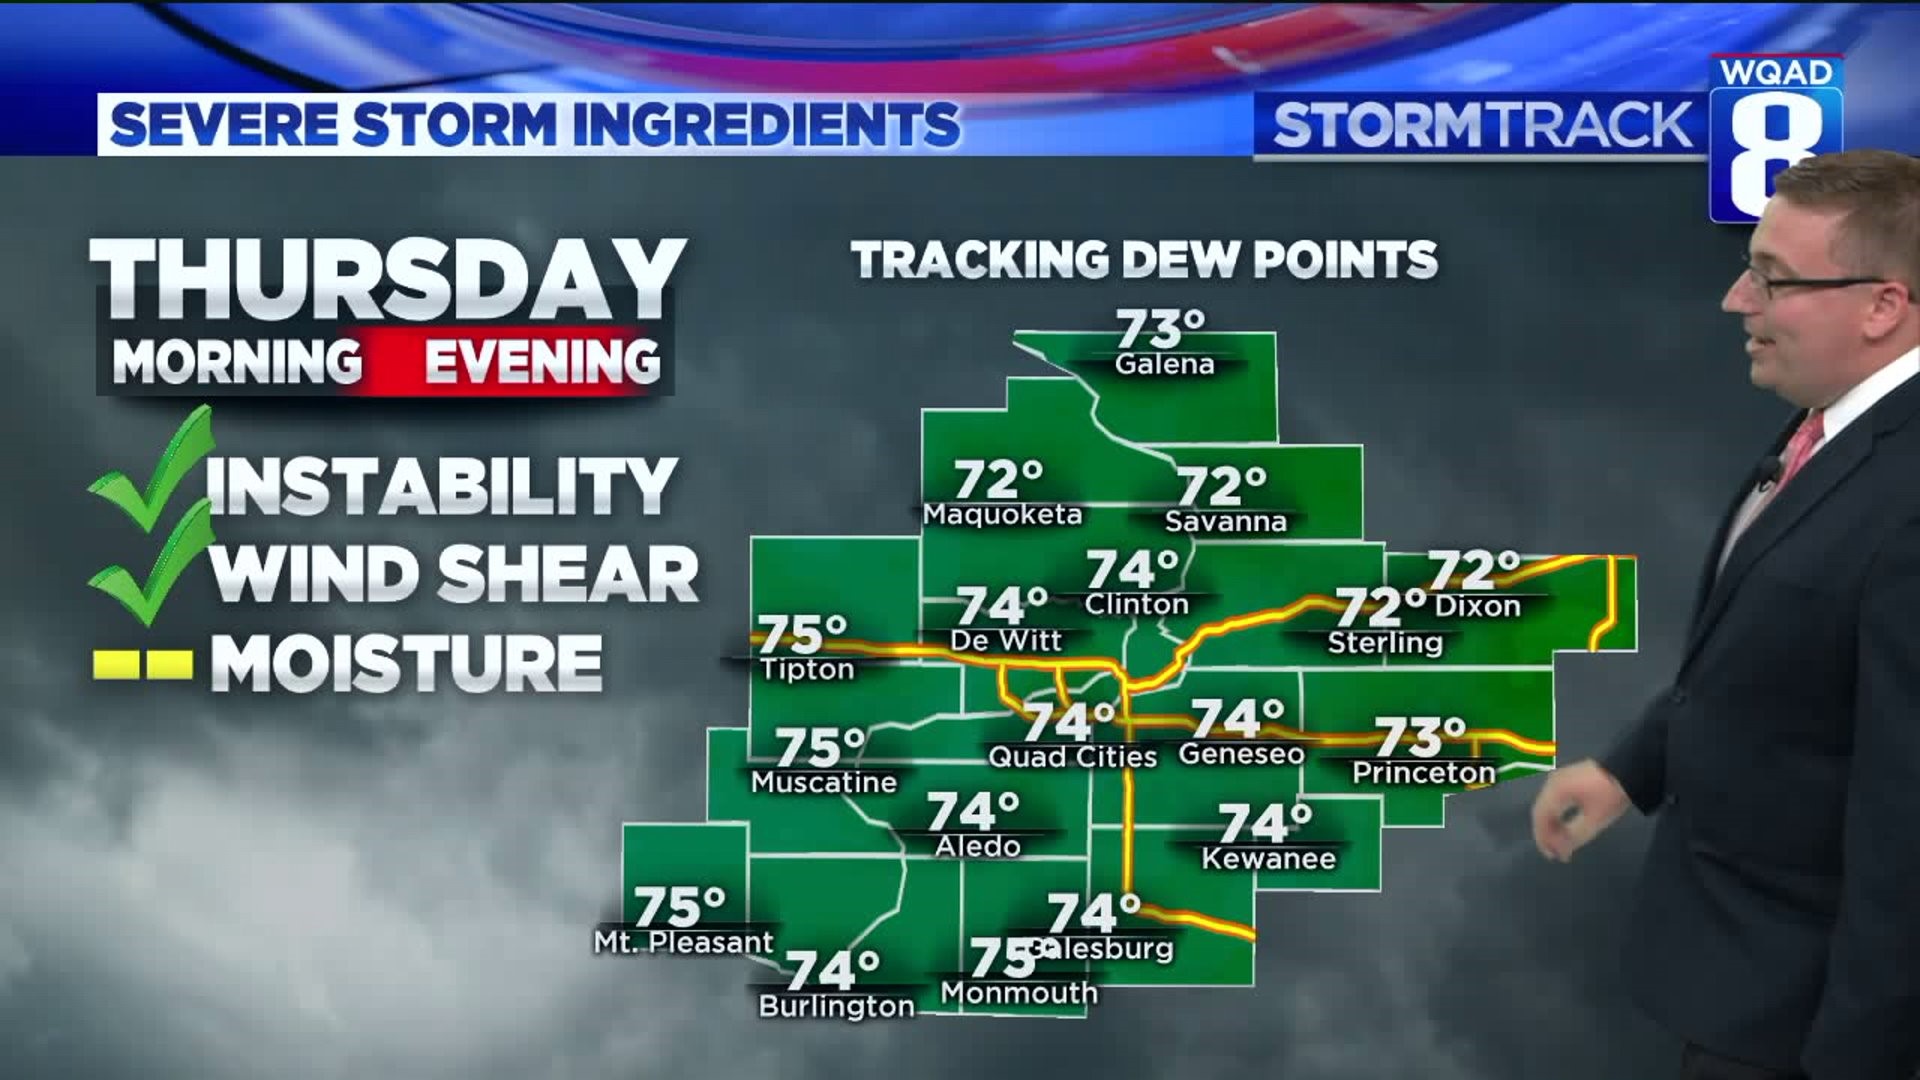 Tracking a few strong storms for Thursday